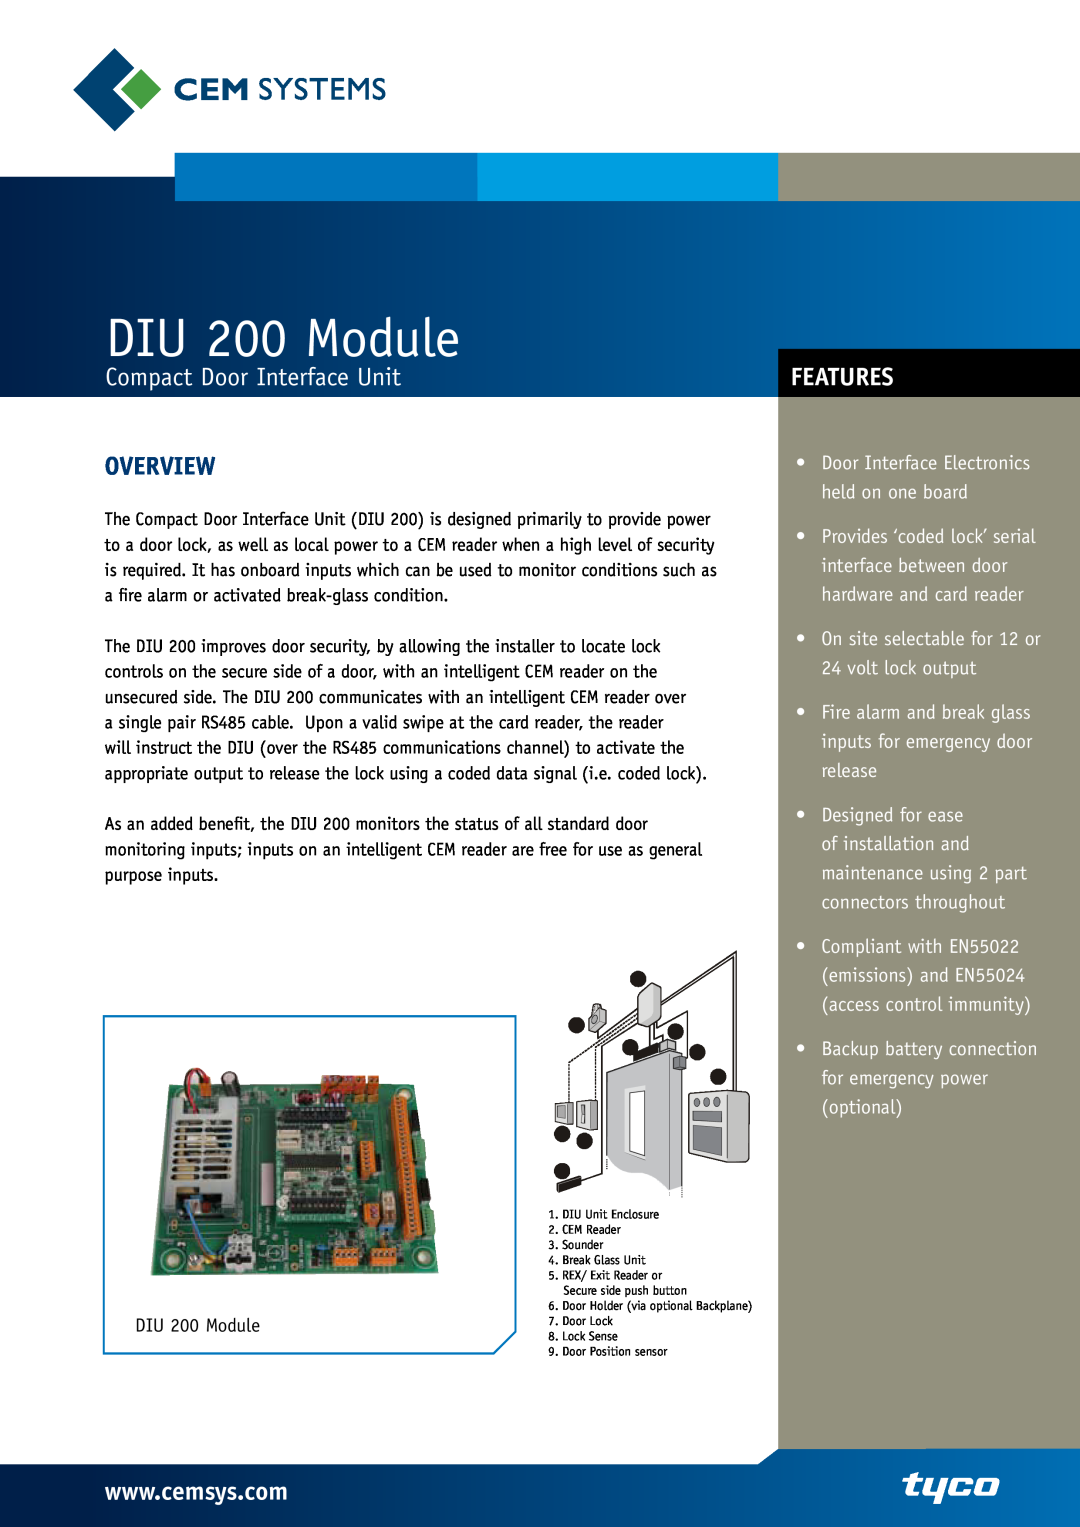 Tyco manual Overview, DIU 200 Module, Compact Door Interface Unit, Features, access control immunity 